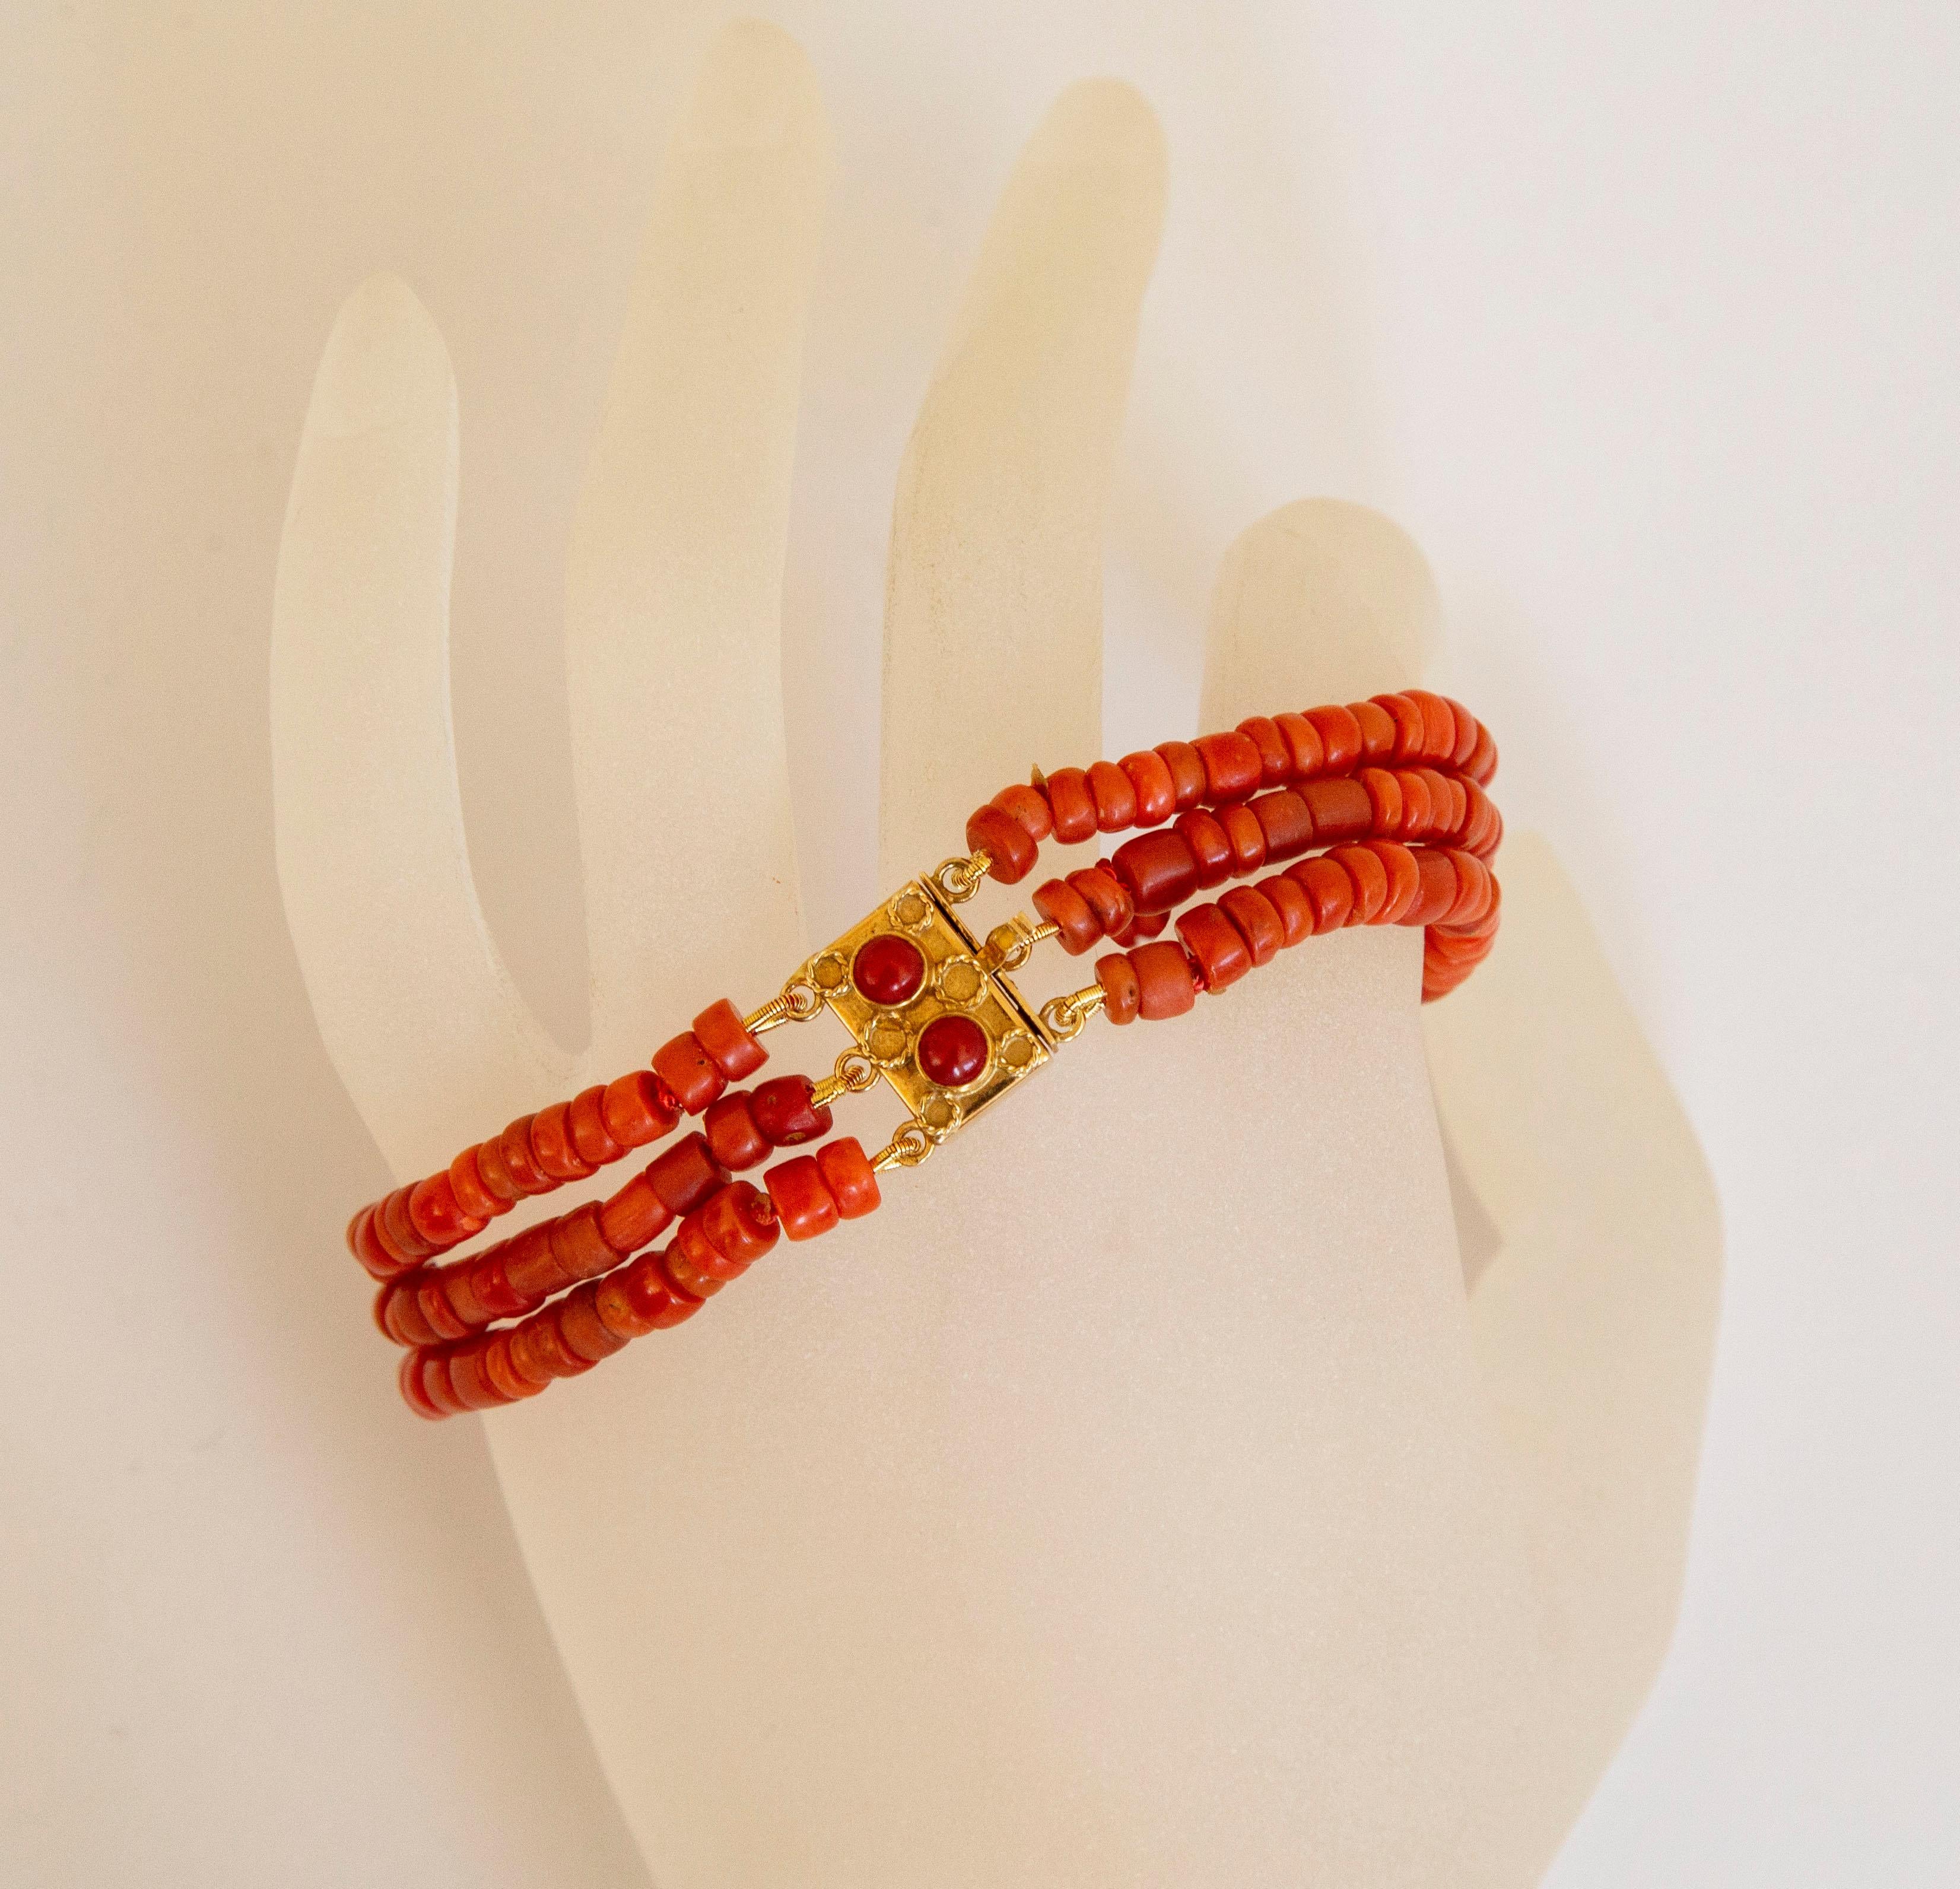 A vintage bracelet made of natural red coral beads with 14 karat golden clasp. The bracelet features three strands of barrel - shaped beads. The beads differ in the length from 3 mm till 6mm as well as in the color from pale to more saturated